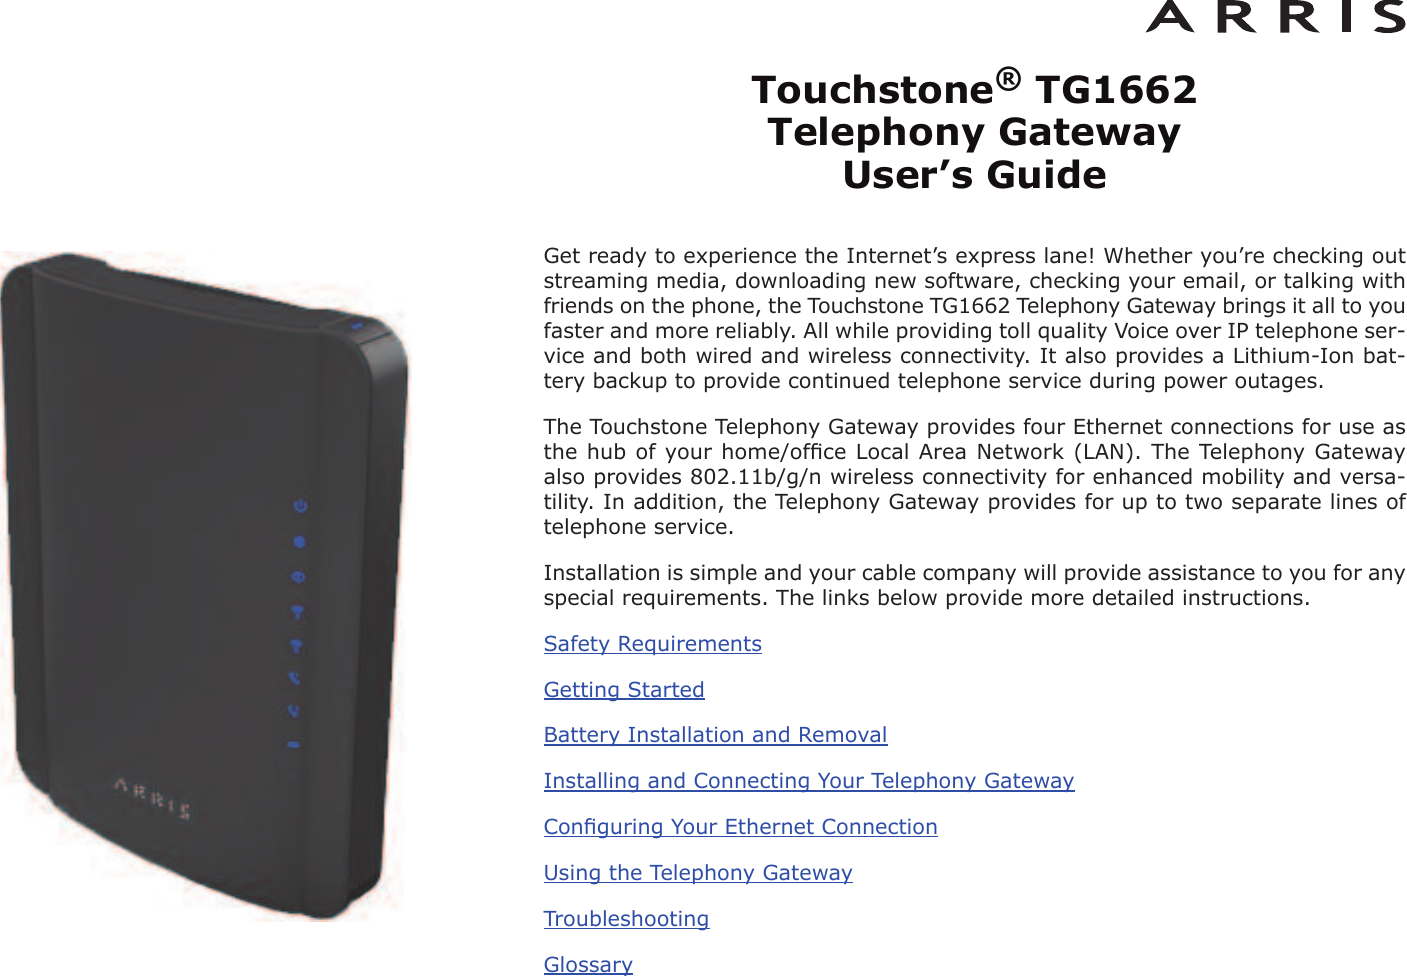 Touchstone®TG1662 Telephony Gateway User’s GuideGet ready to experience the Internet’s express lane! Whether you’re checking outstreaming media, downloading new software, checking your email, or talking withfriends on the phone, the Touchstone TG1662 Telephony Gateway brings it all to youfaster and more reliably. All while providing toll quality Voice over IP telephone ser -vice and both wired and wireless connectivity. It also provides a Lithi um-Ion bat-tery backup to provide continued telephone service during power outages.The Touchstone Telephony Gateway provides four Ethernet connections for use asthe hub of your home/ofﬁce Local Area Network (LAN). The Telephony Gatewayalso provides 802.11b/g/n wireless connectivity for enhanced mobility and versa-tility. In addition, the Telephony Gateway provides for up to two separate lines oftelephone service.Installation is simple and your cable company will provide assistance to you for anyspecial requirements. The links below provide more detailed instructions.Safety RequirementsGetting StartedBattery Installation and RemovalInstalling and Connecting Your Telephony GatewayConﬁguring Your Ethernet ConnectionUsing the Telephony GatewayTroubleshootingGlossary